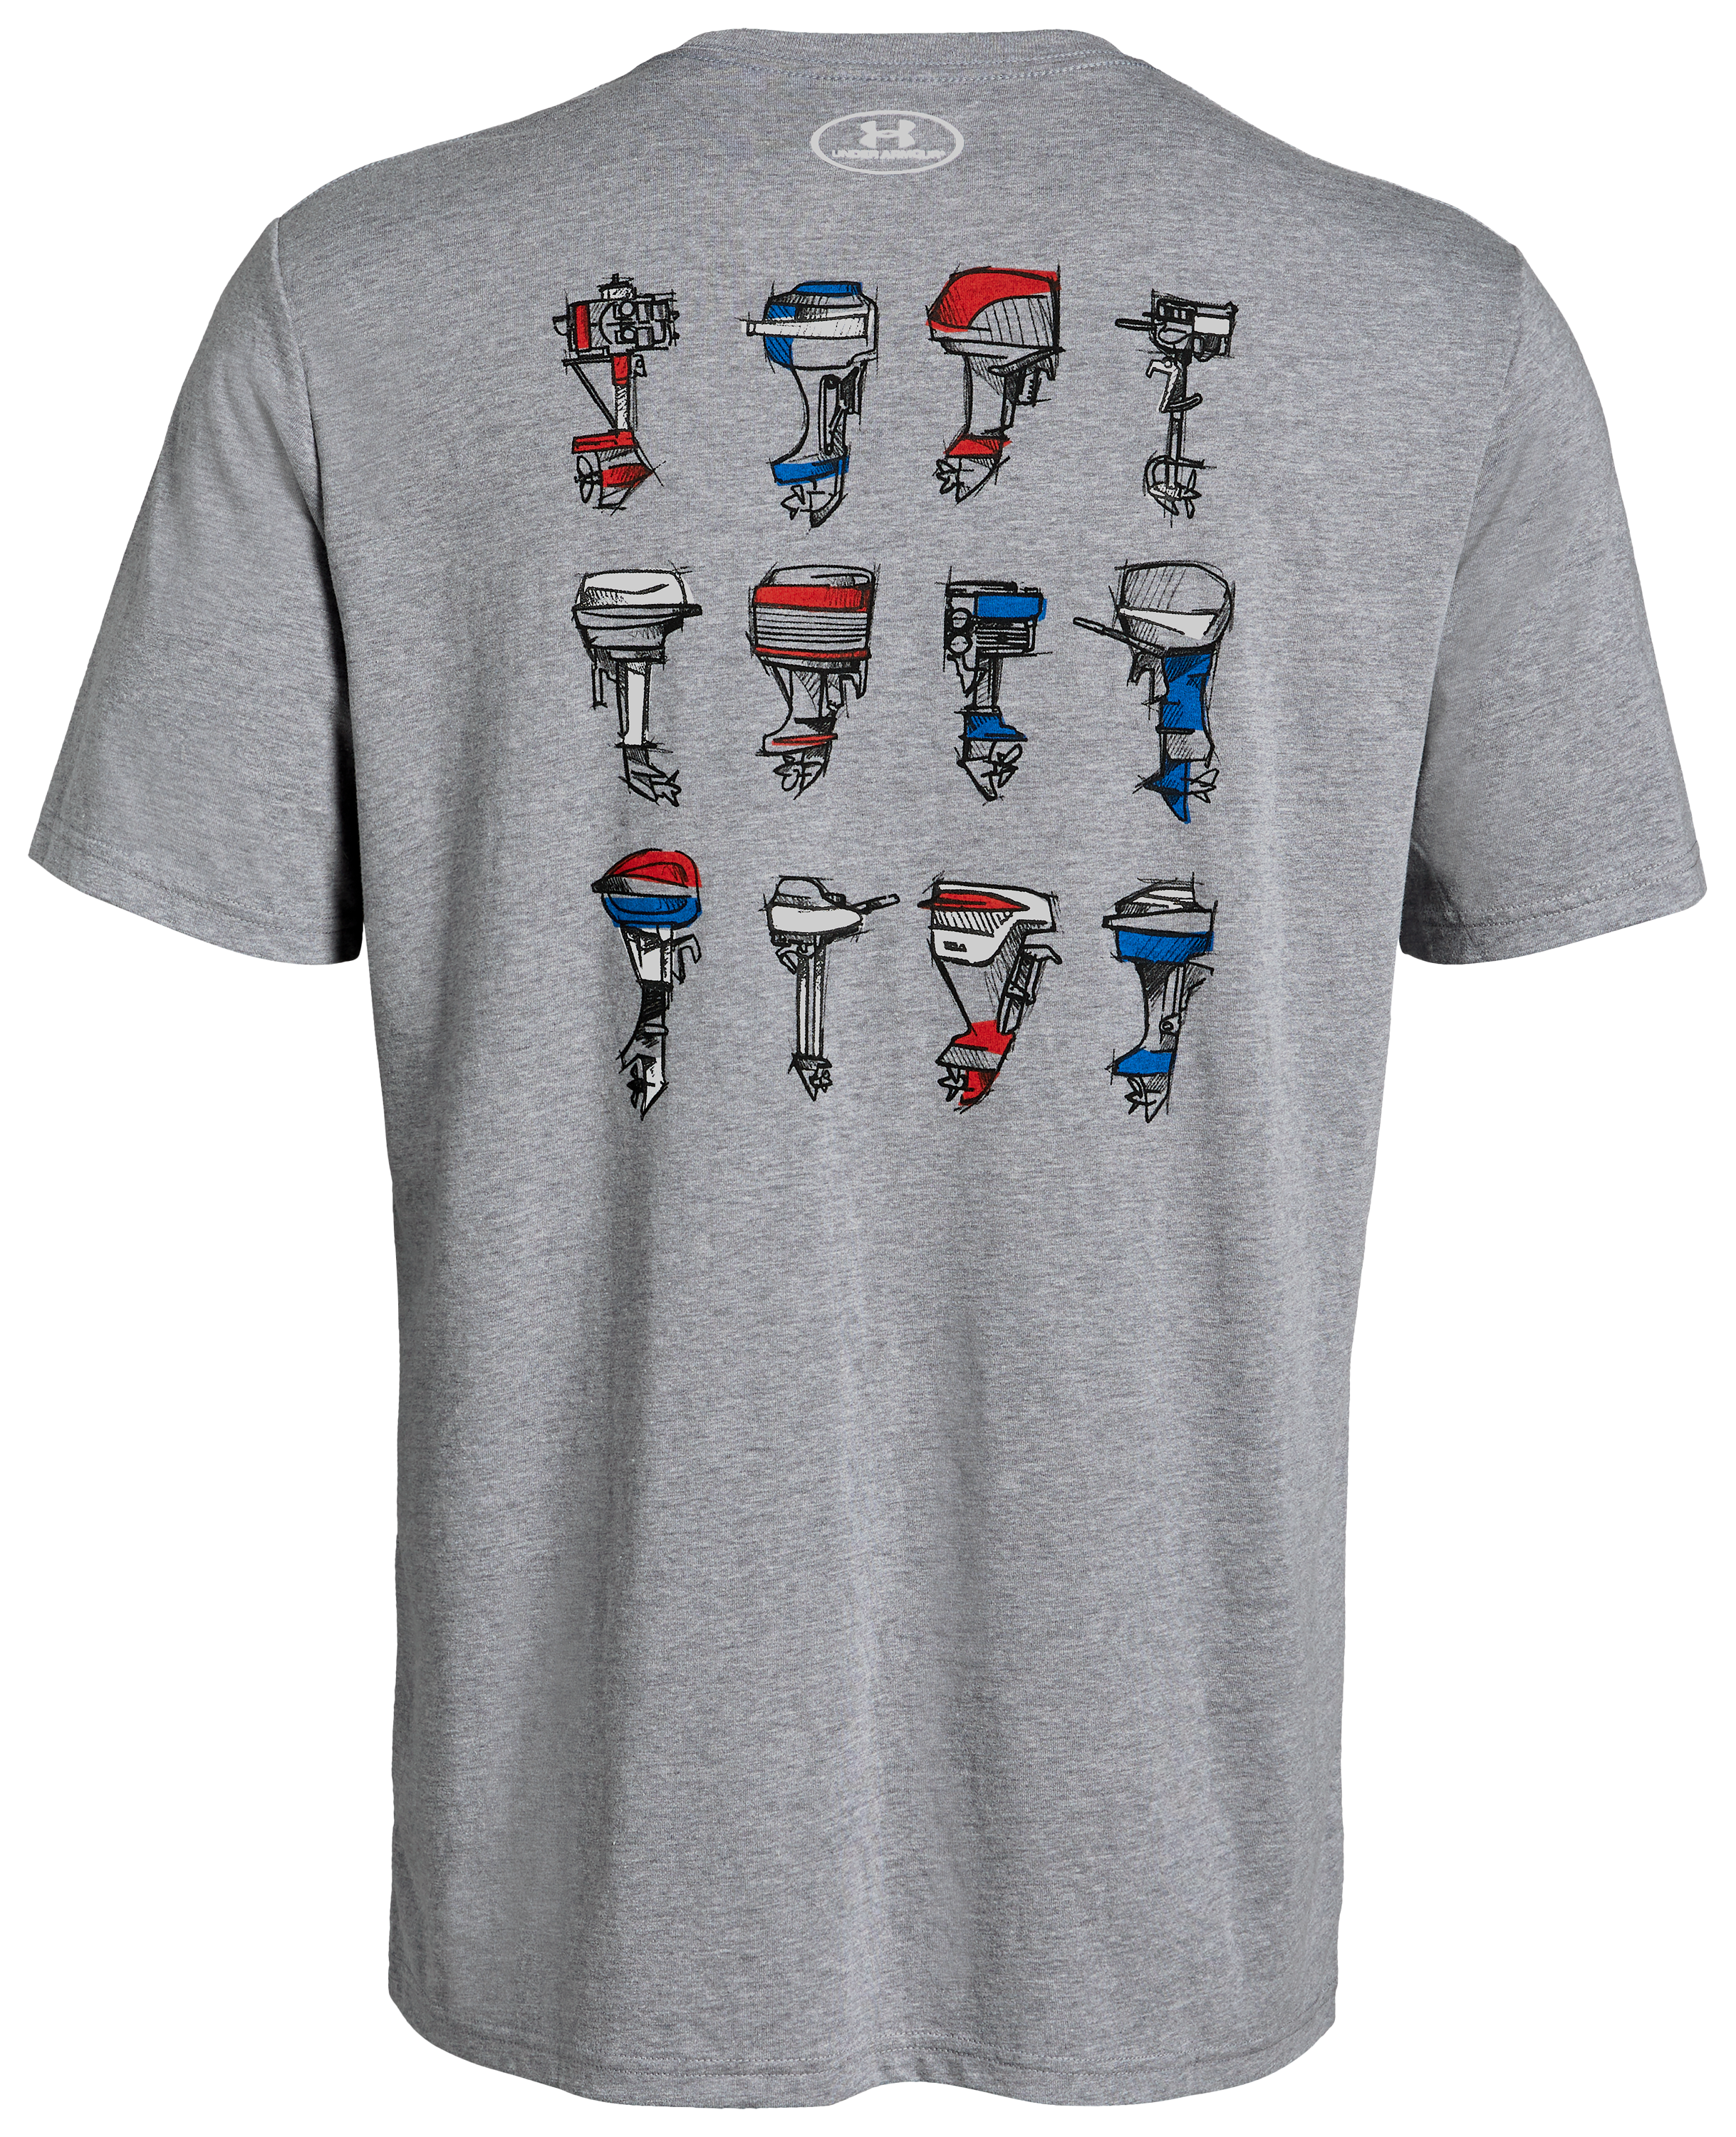 Under Armour Vintage Outboard T-Shirt for Men